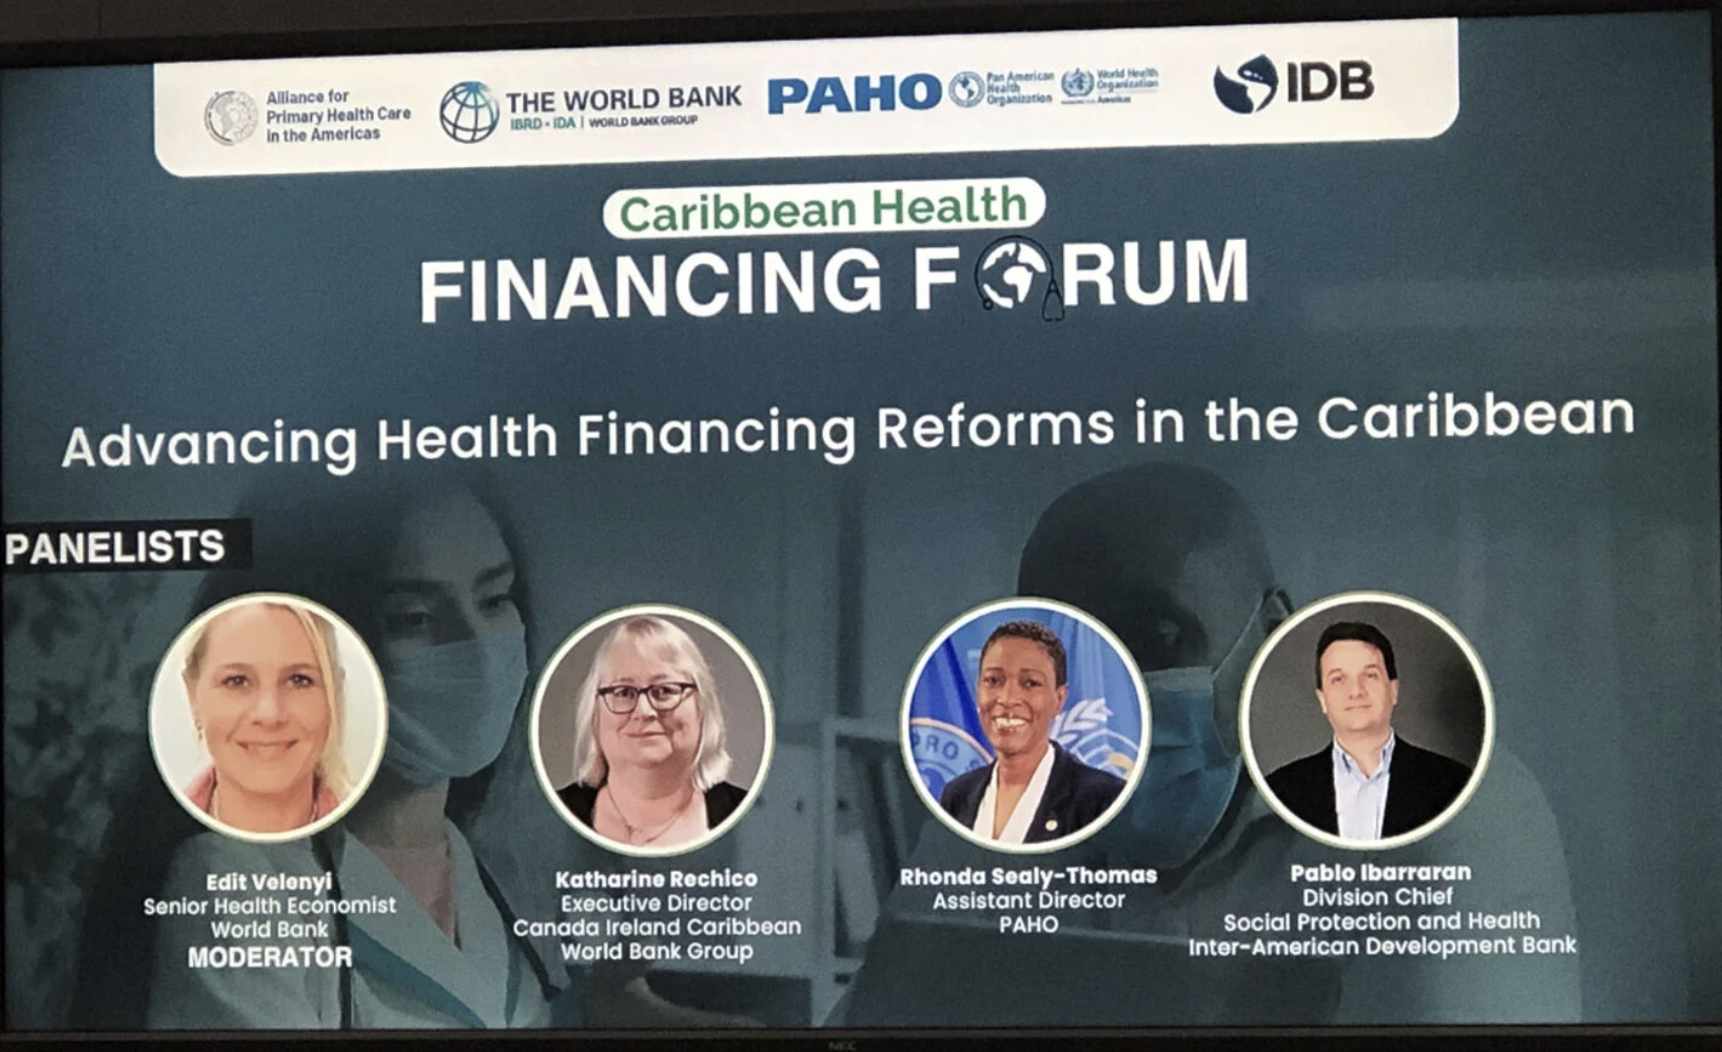 PAHO, World Bank and IDB join forces to strengthen Caribbean health financing